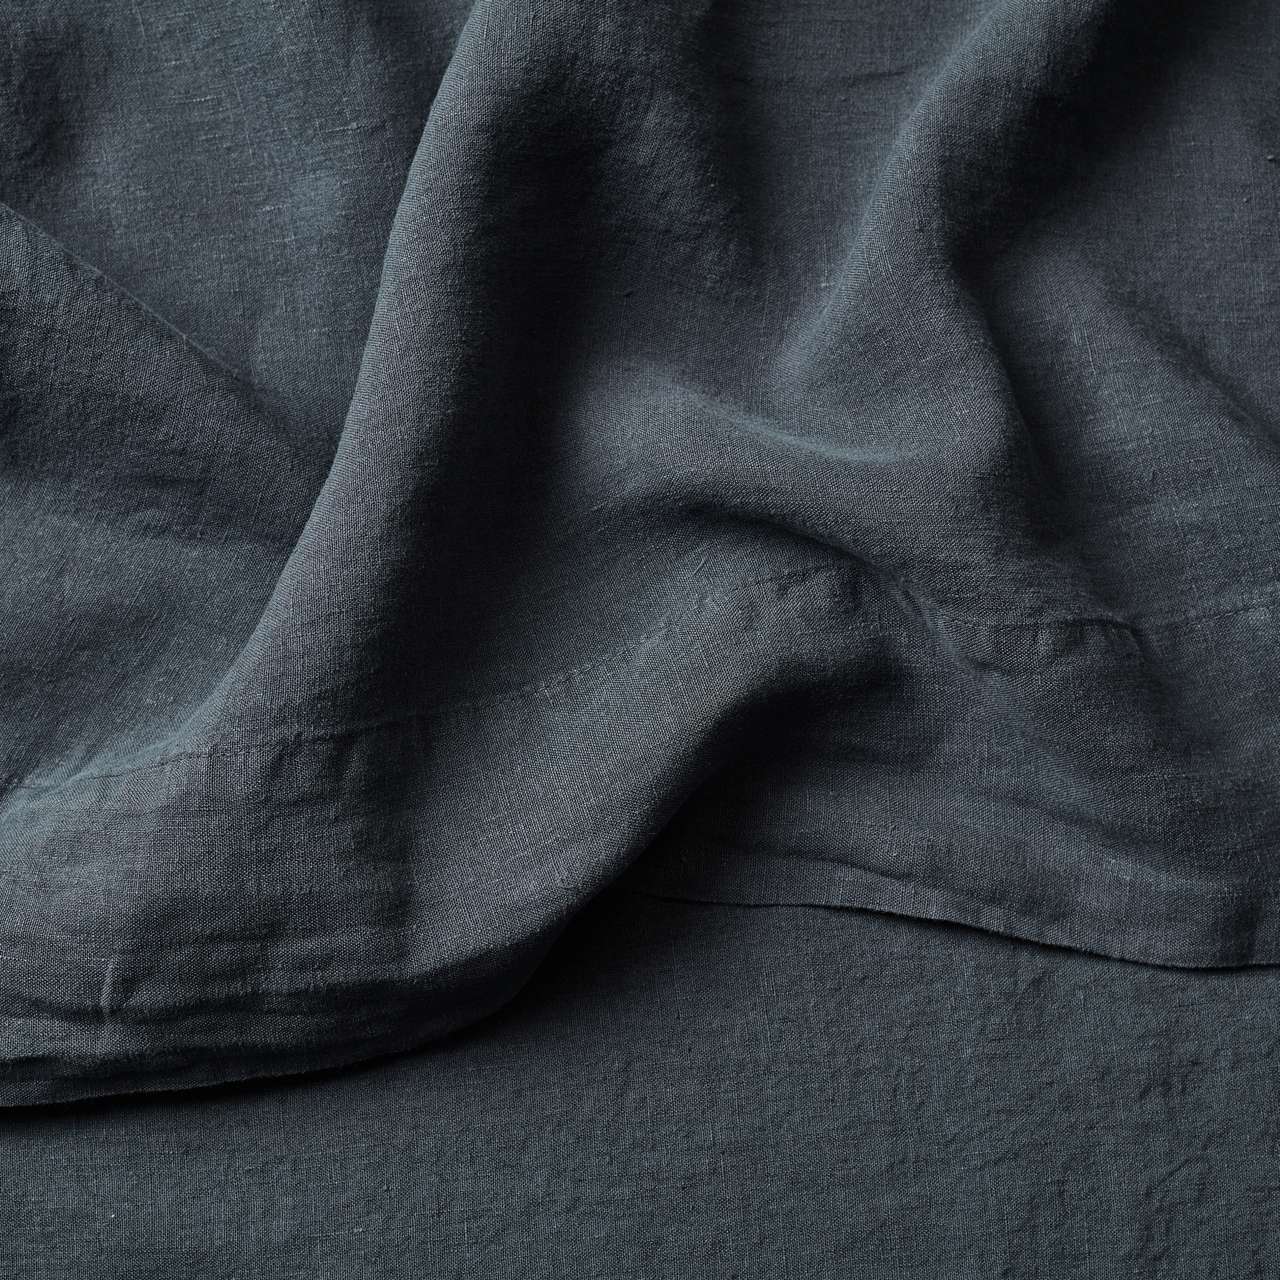 Flax Linen Bed Sheets Image 5